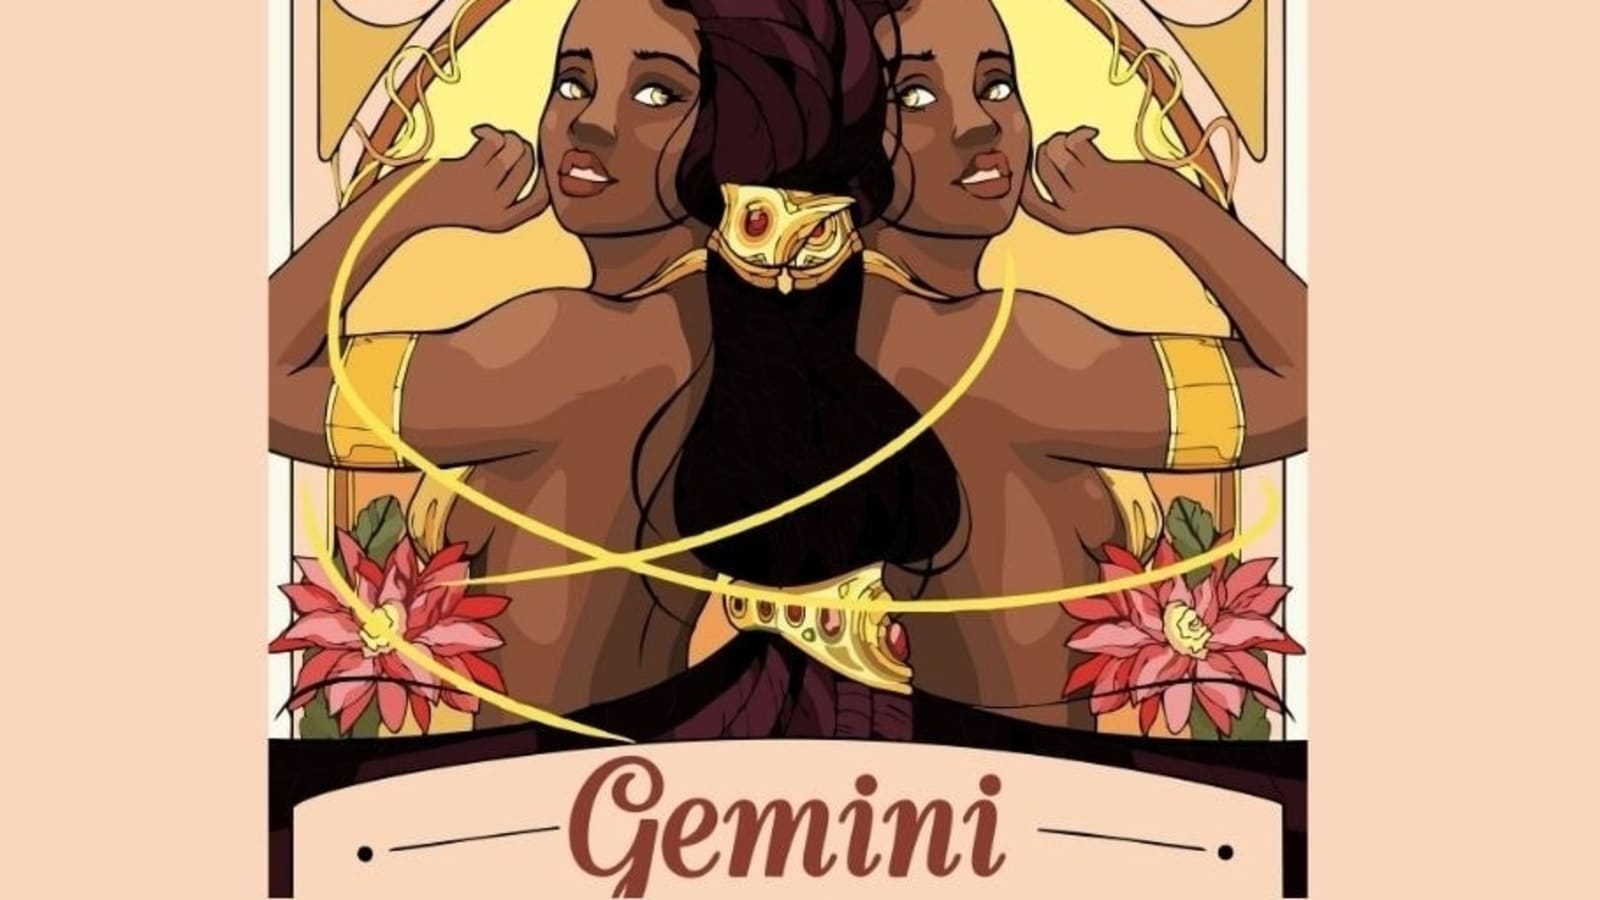 Gemini Horoscope Today: Daily prediction for June 29,'22 states, be joyous